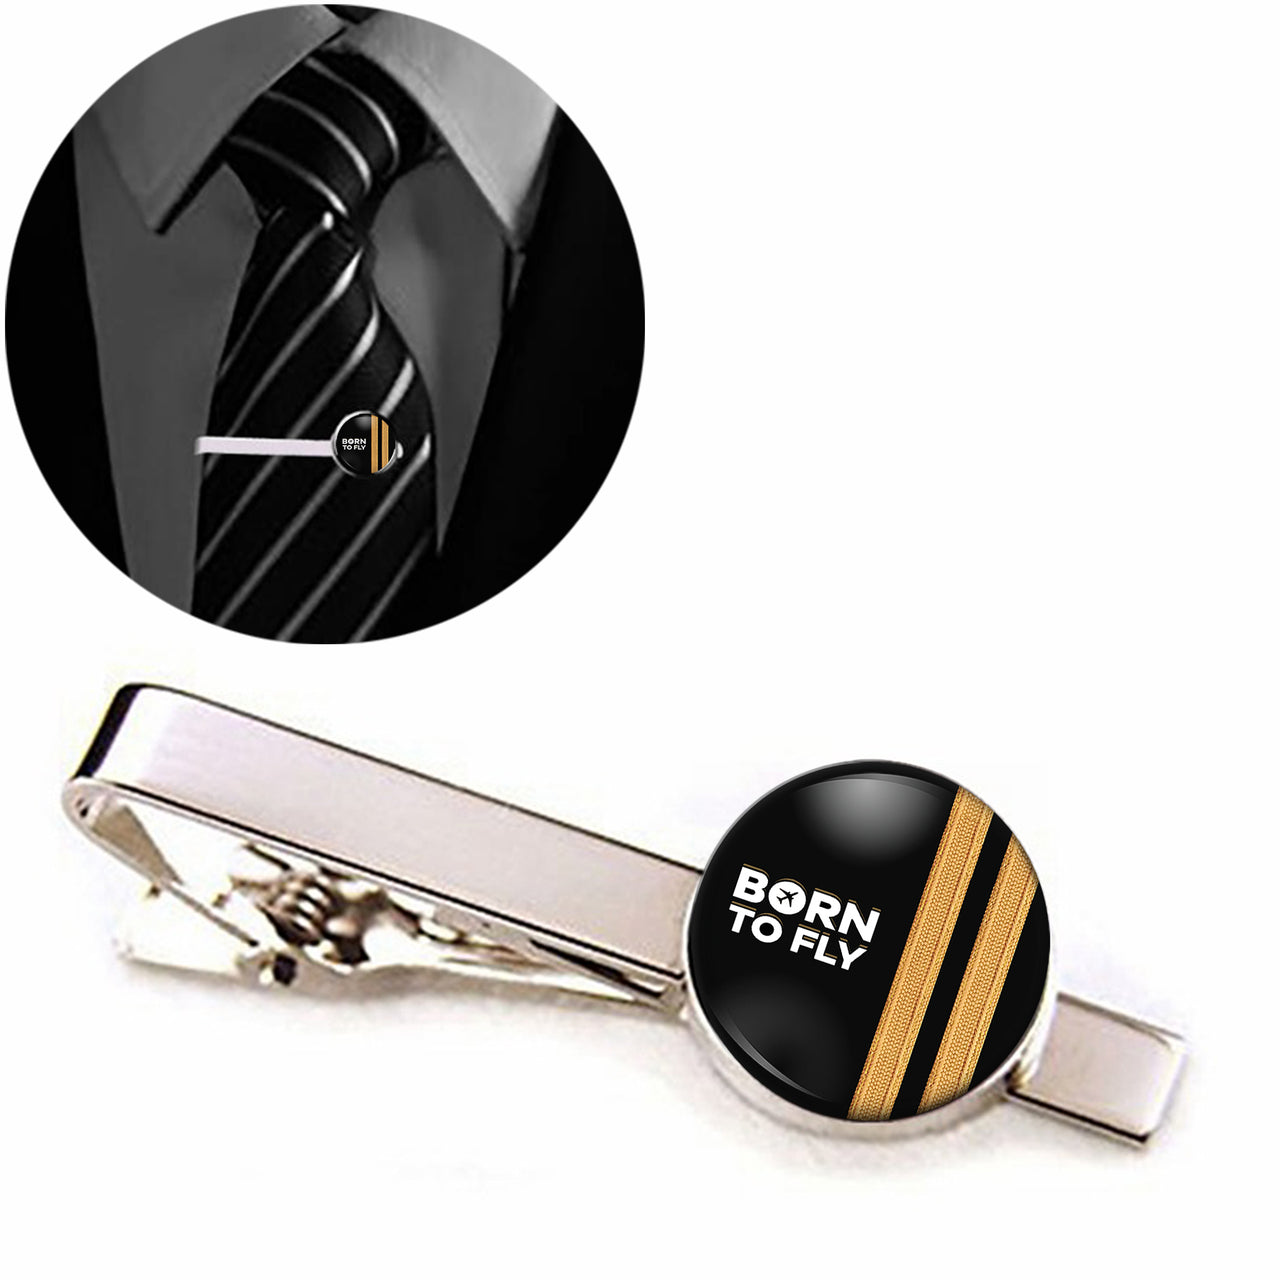 Born To Fly & Pilot Epaulettes (2 Lines) Designed Tie Clips